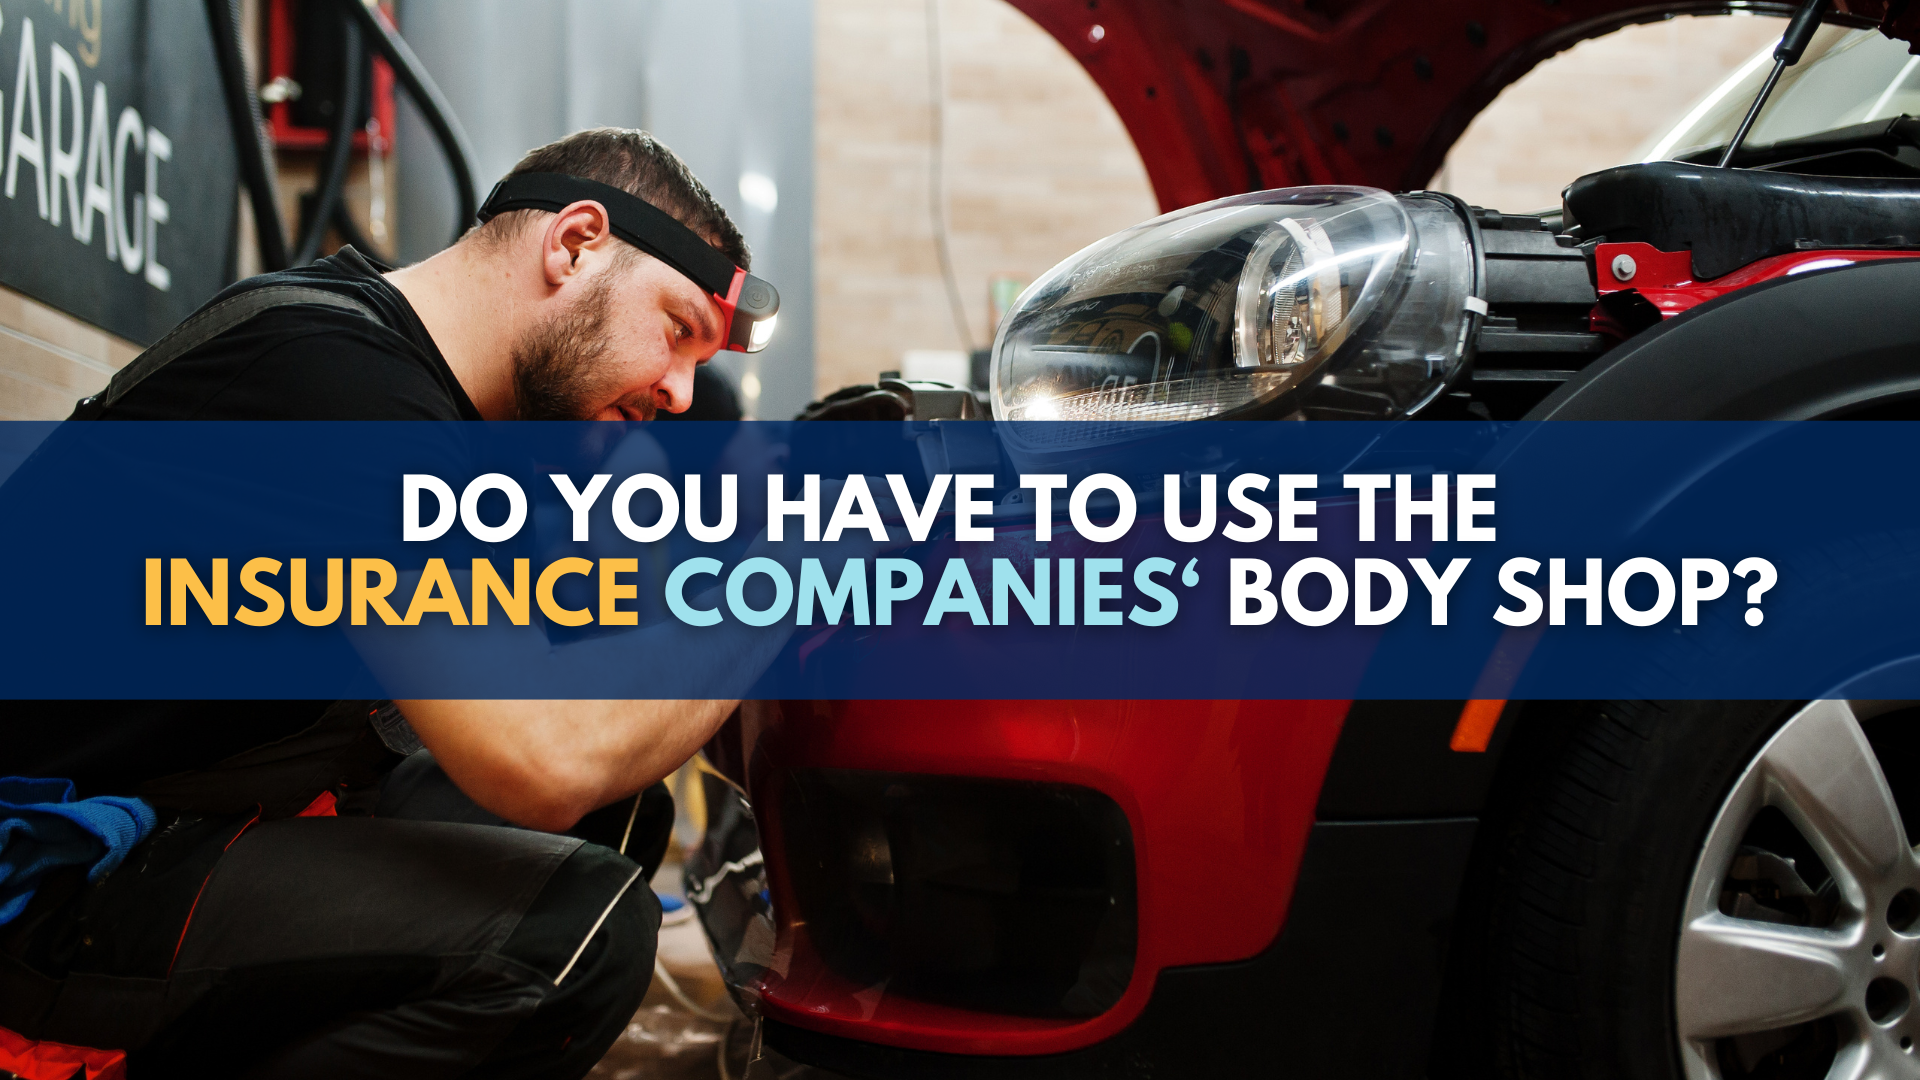 Do you have to use the insurance companies' body shop?